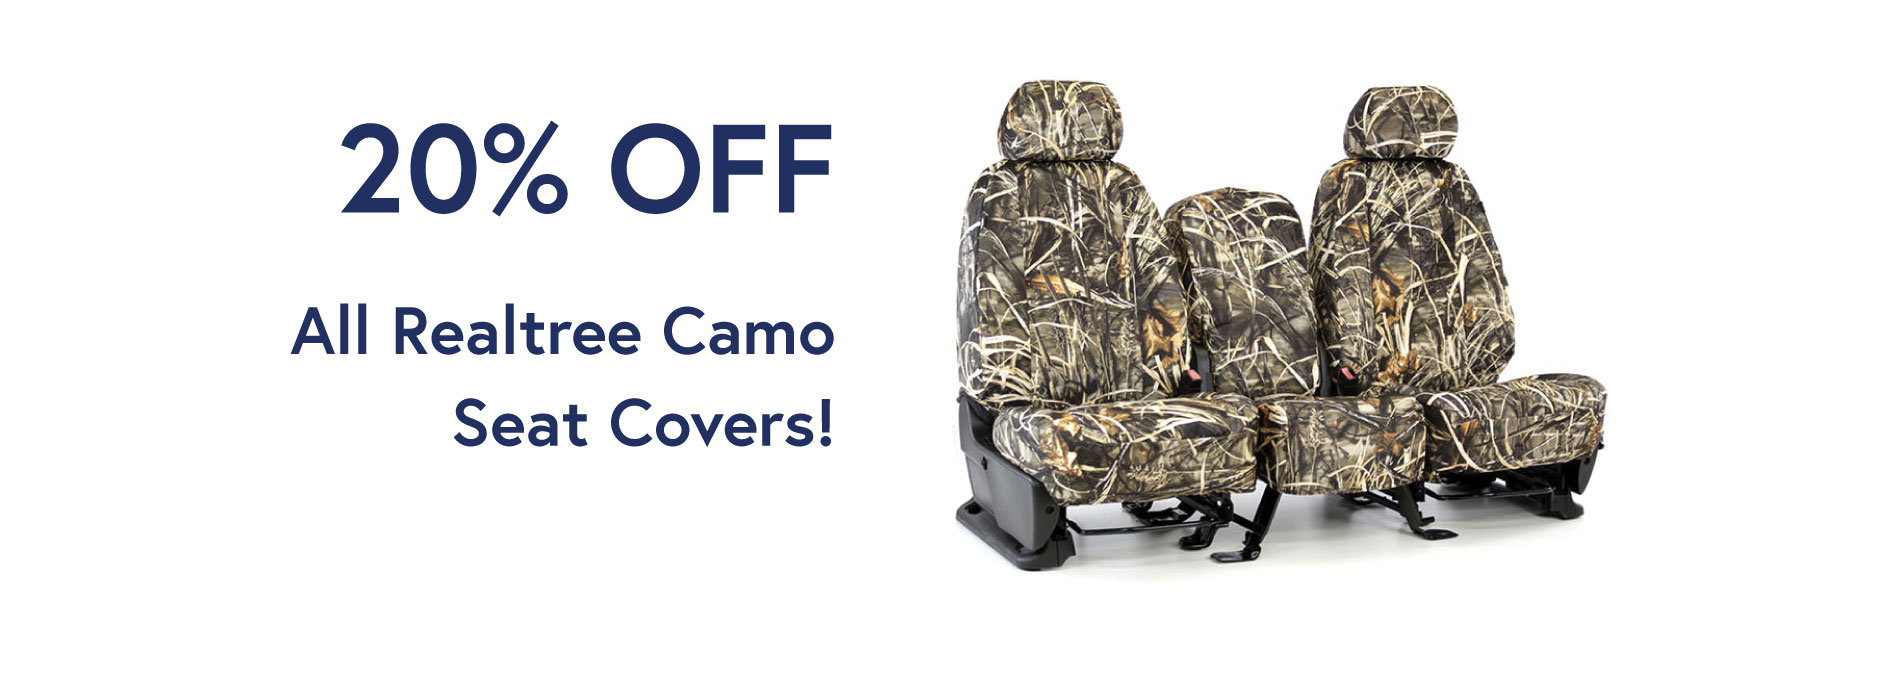 20% Off All Realtree Camo Seat Covers!